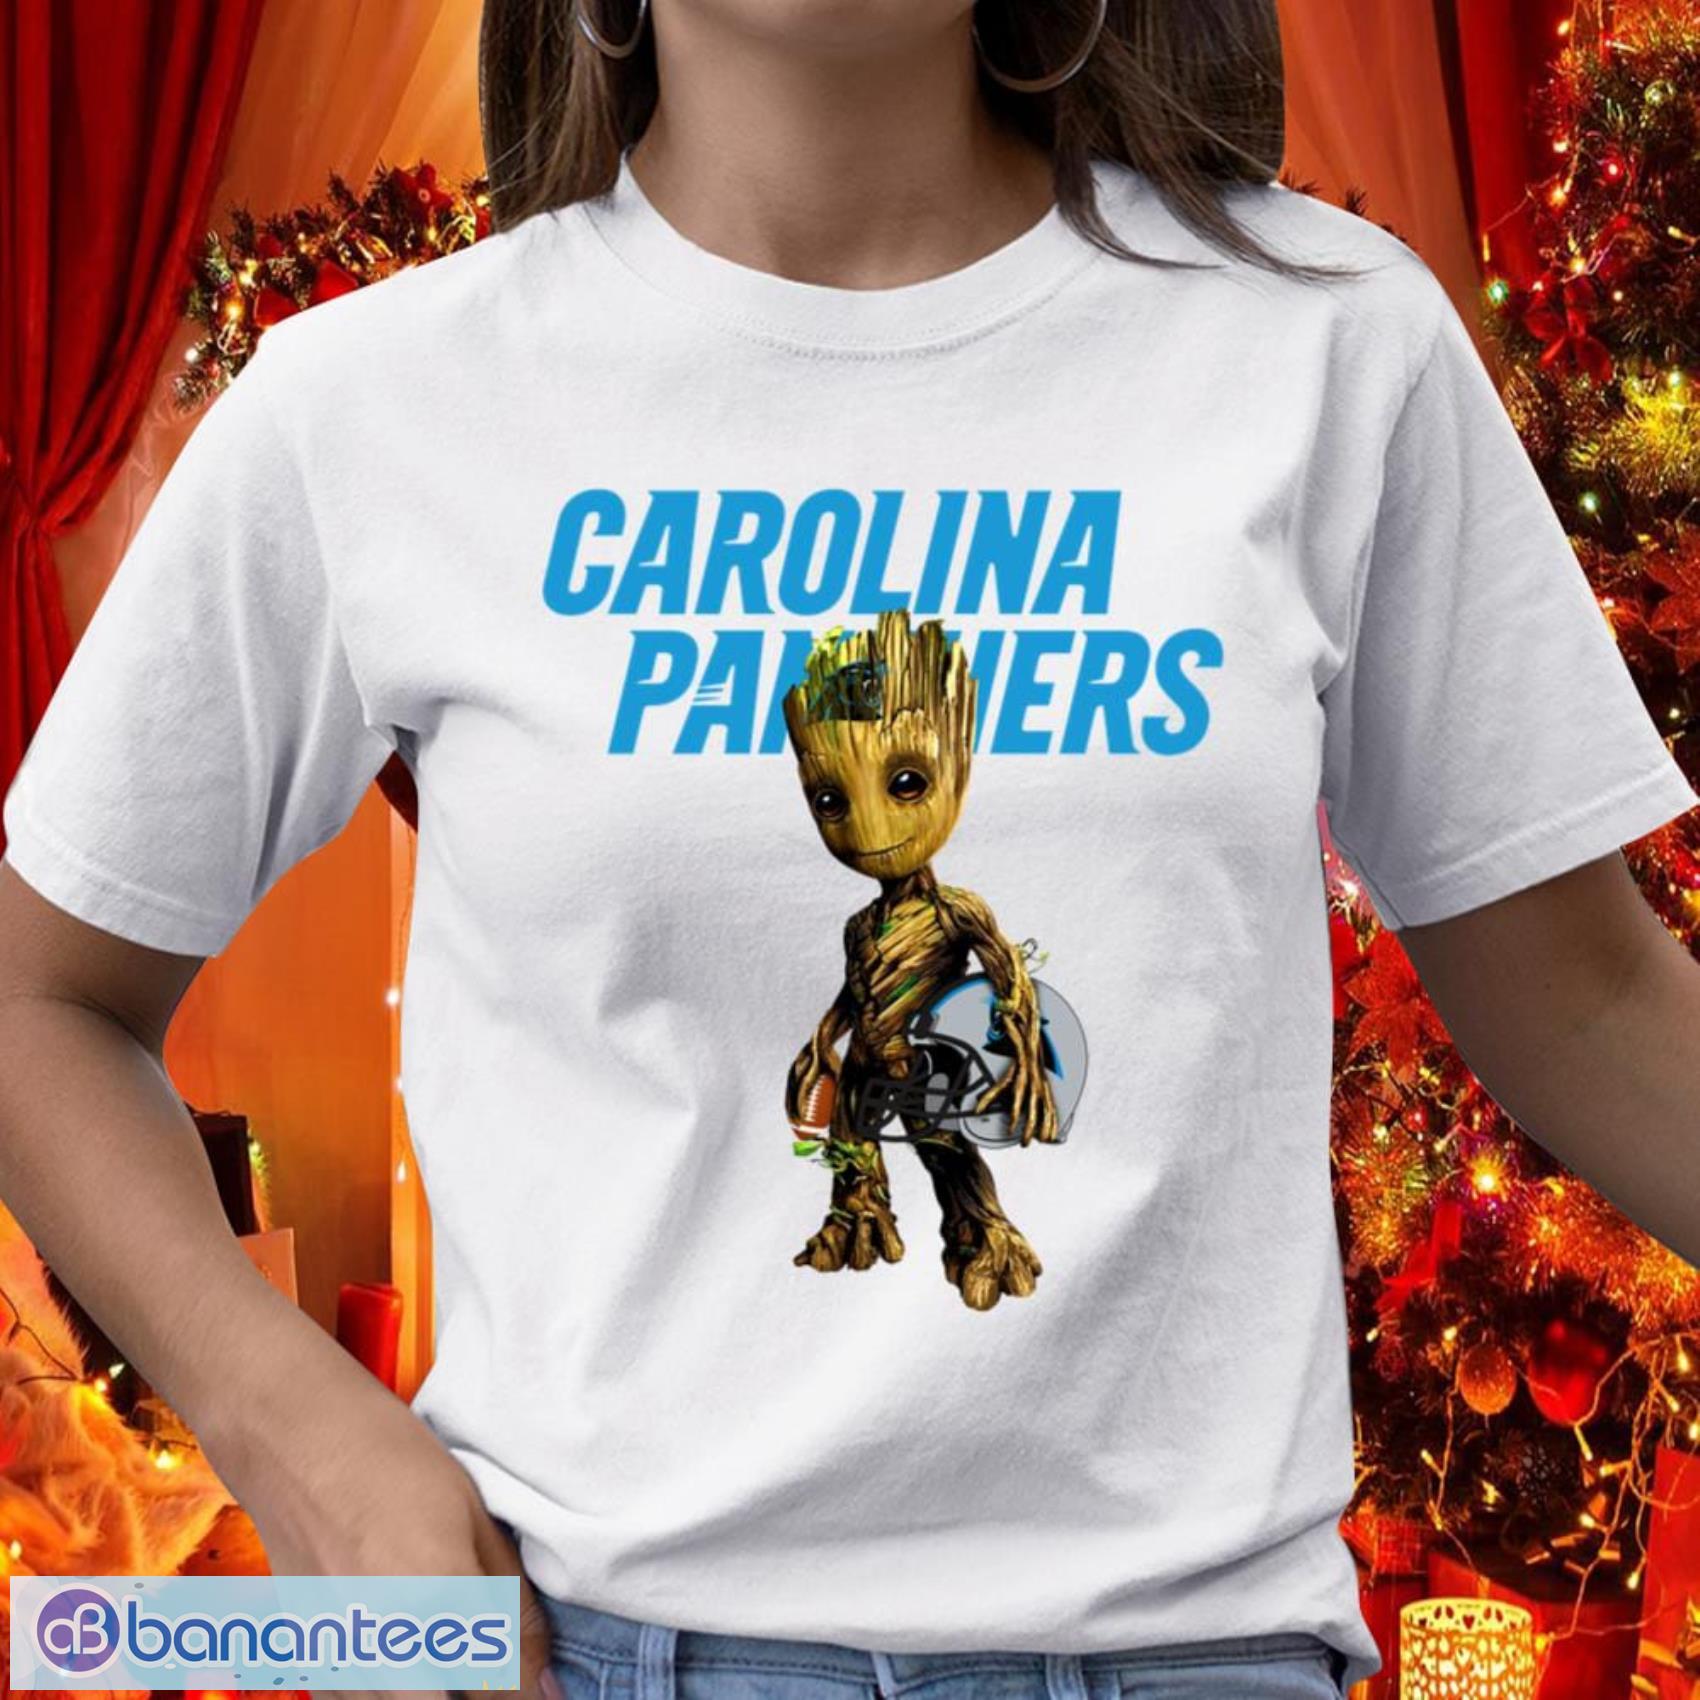 Carolina Panthers NFL Football Gift Fr Fans Groot Marvel Guardians Of The Galaxy T Shirt - Carolina Panthers NFL Football Groot Marvel Guardians Of The Galaxy T Shirt_1